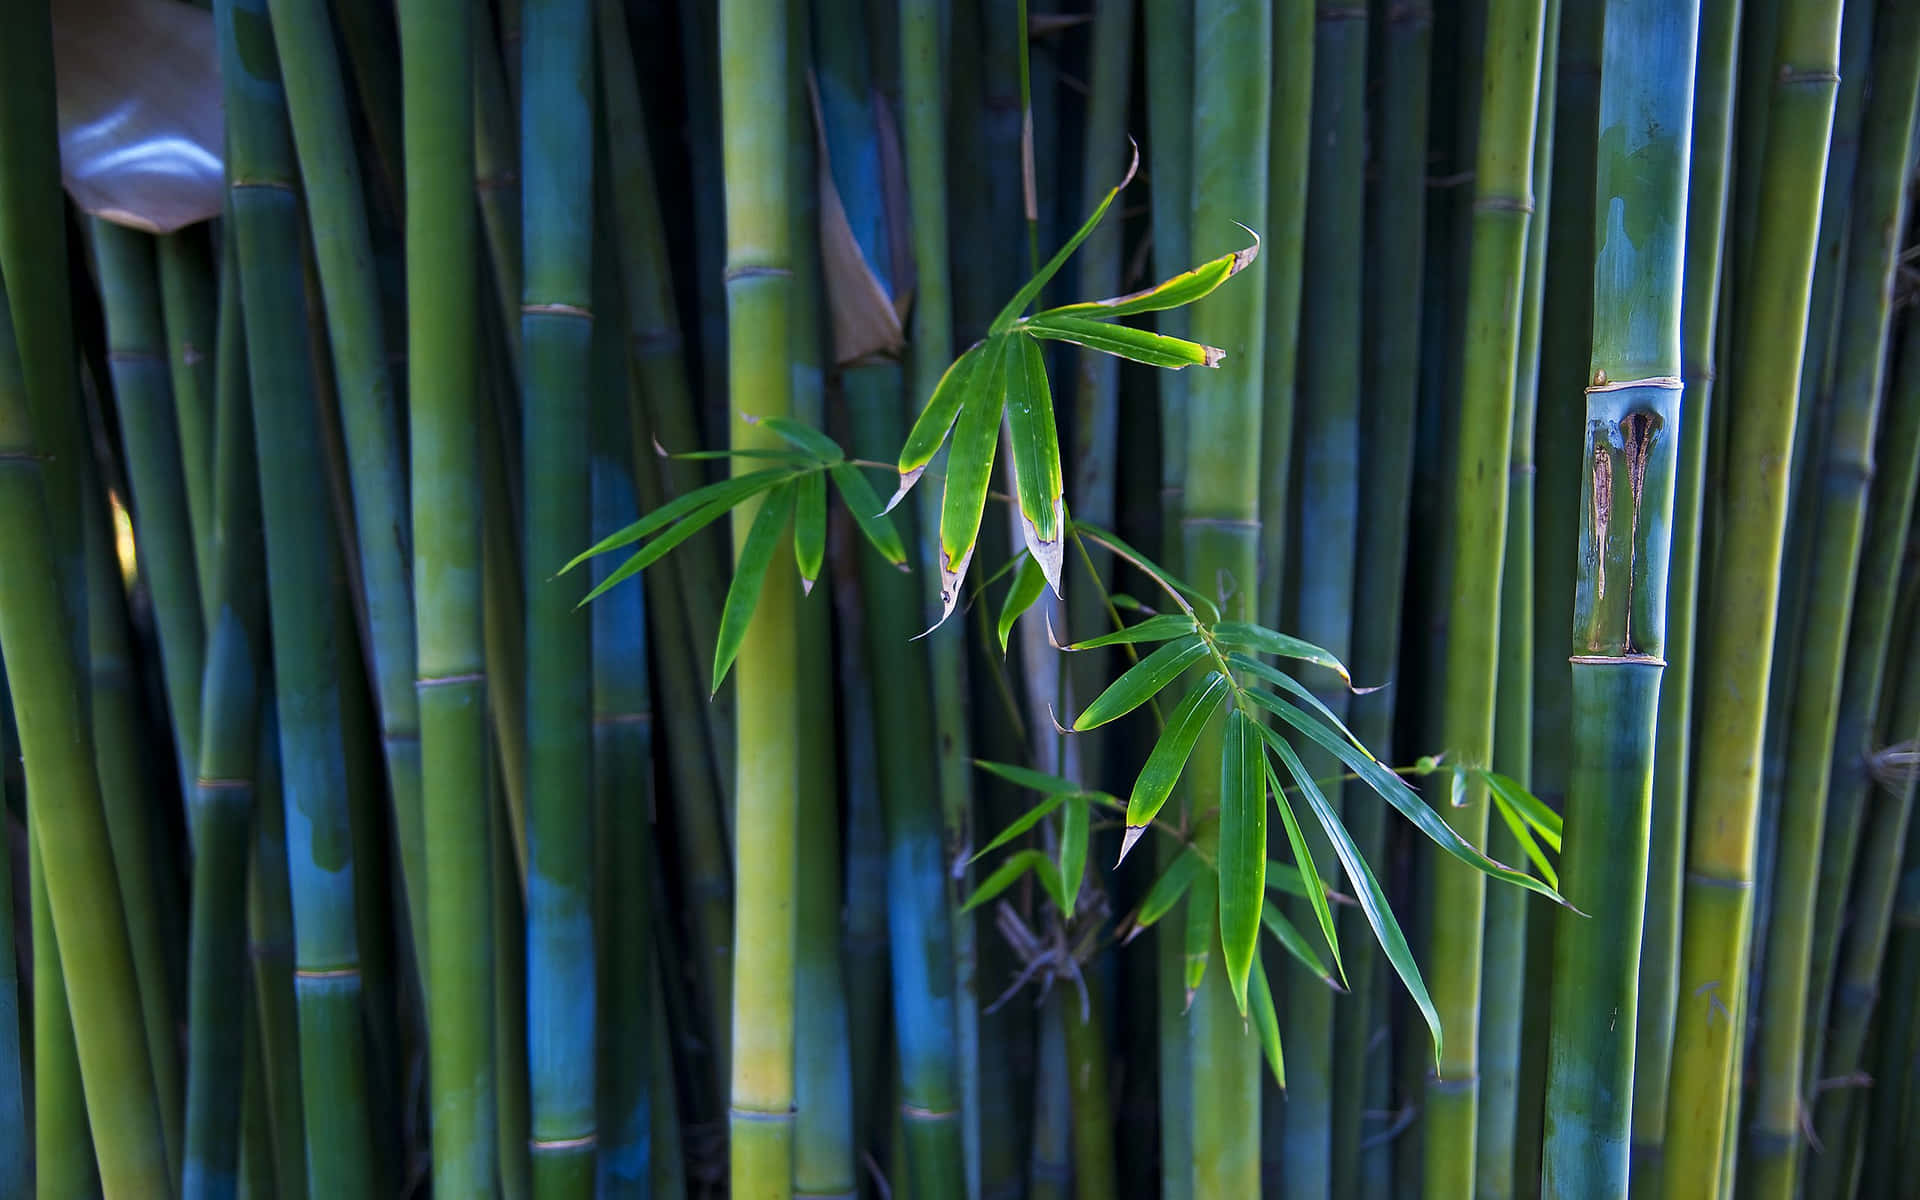 Bask in the Beauty of Bamboo